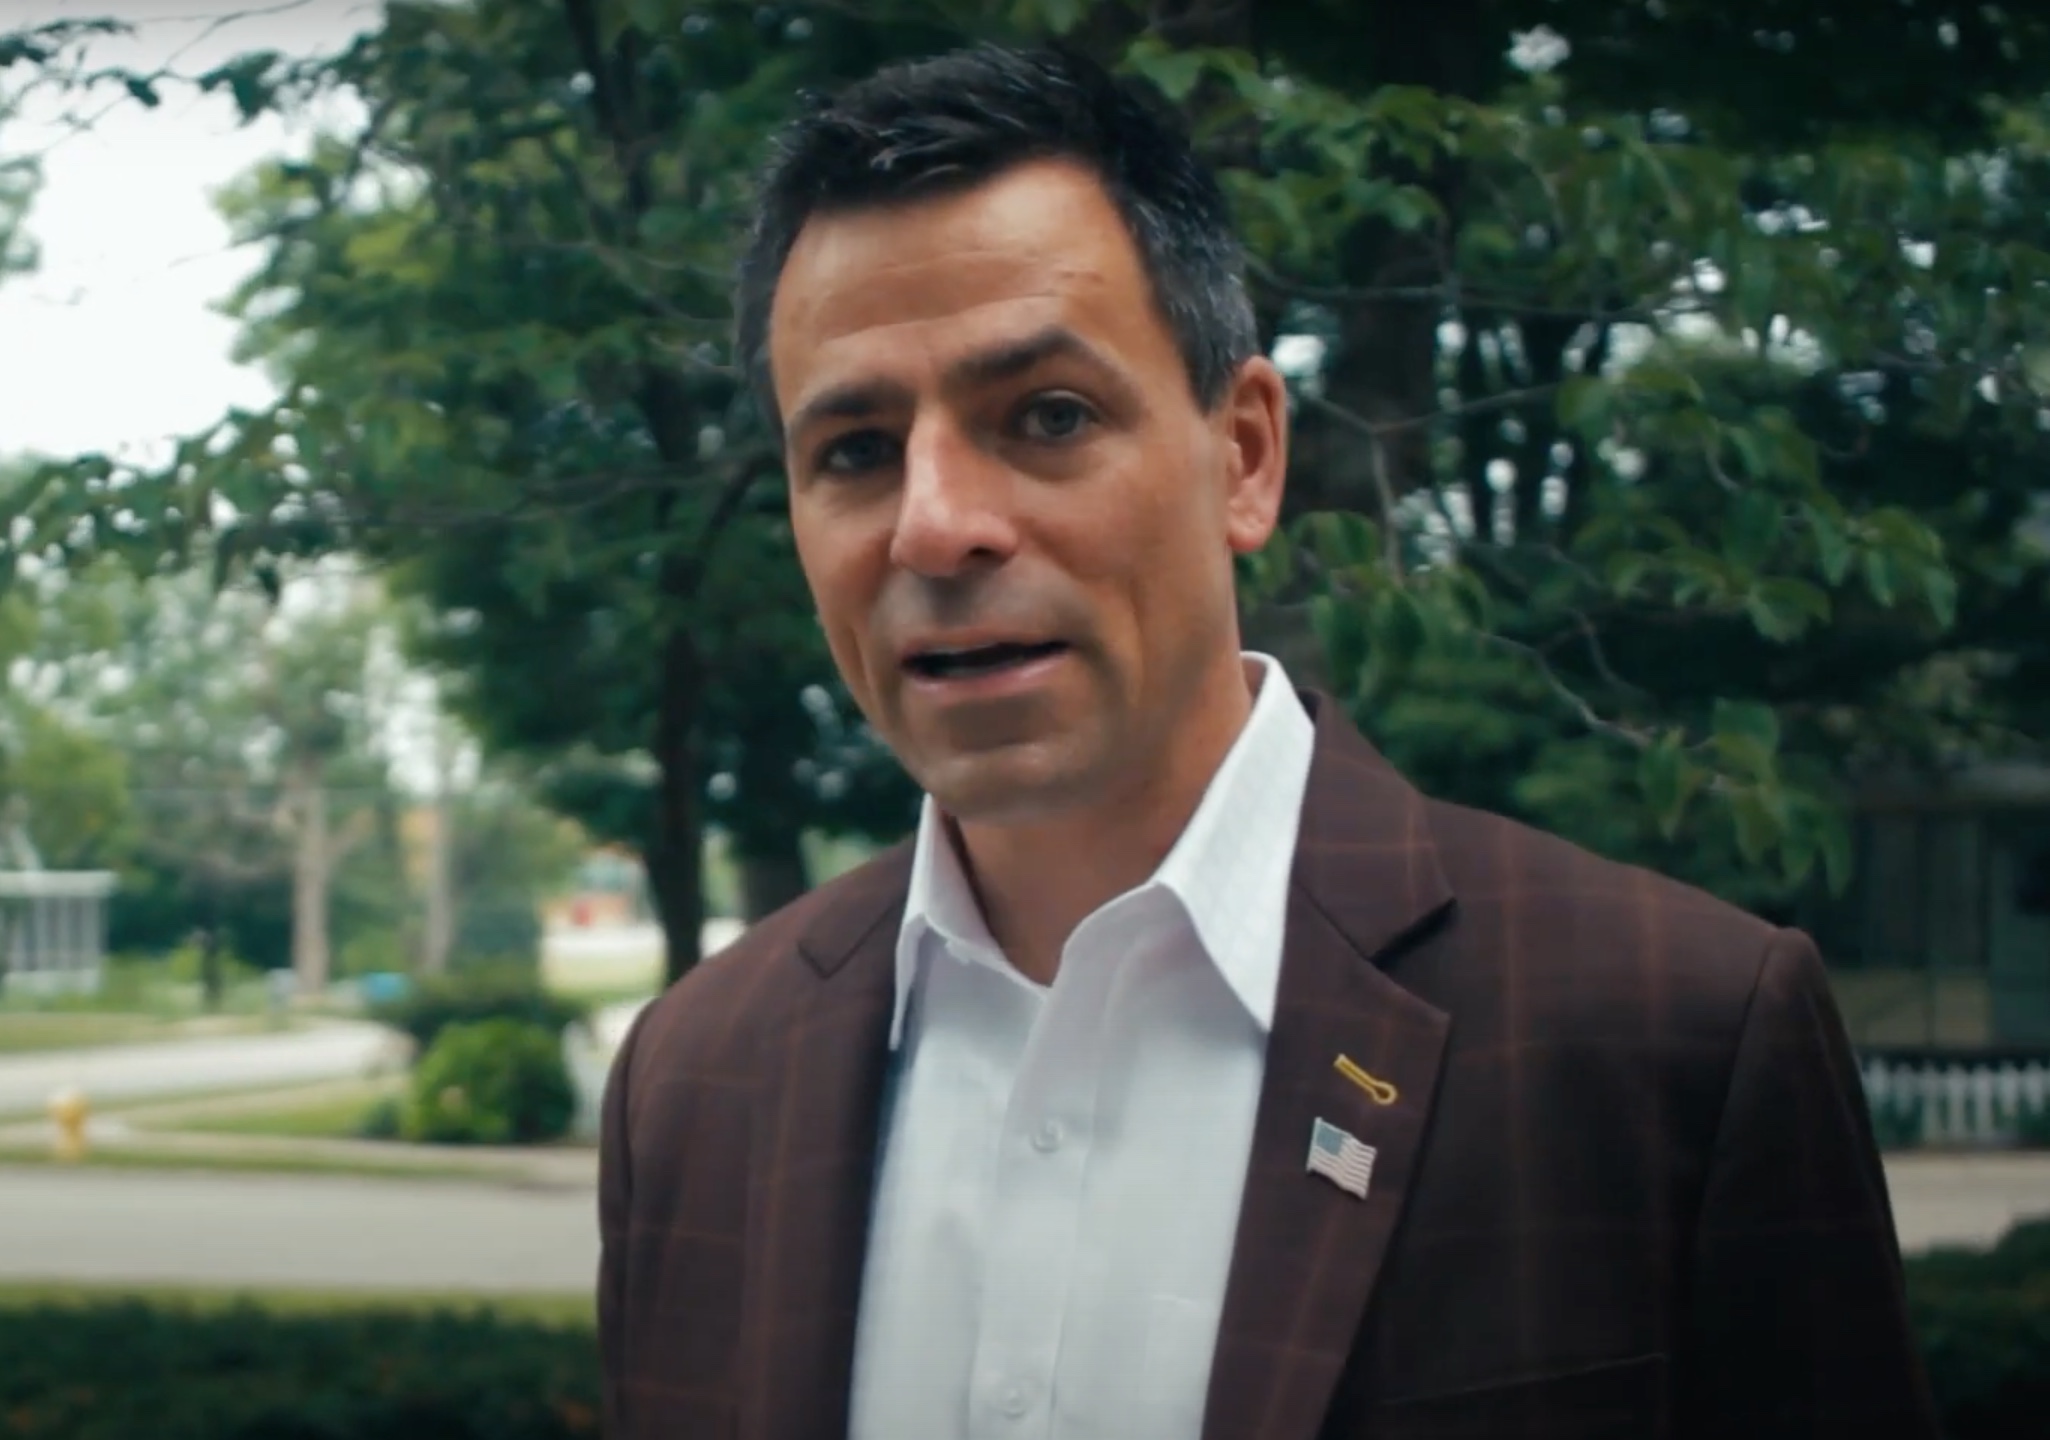 GOP Candidate For Governor Leads in Poll After Being Arrested By the FBI